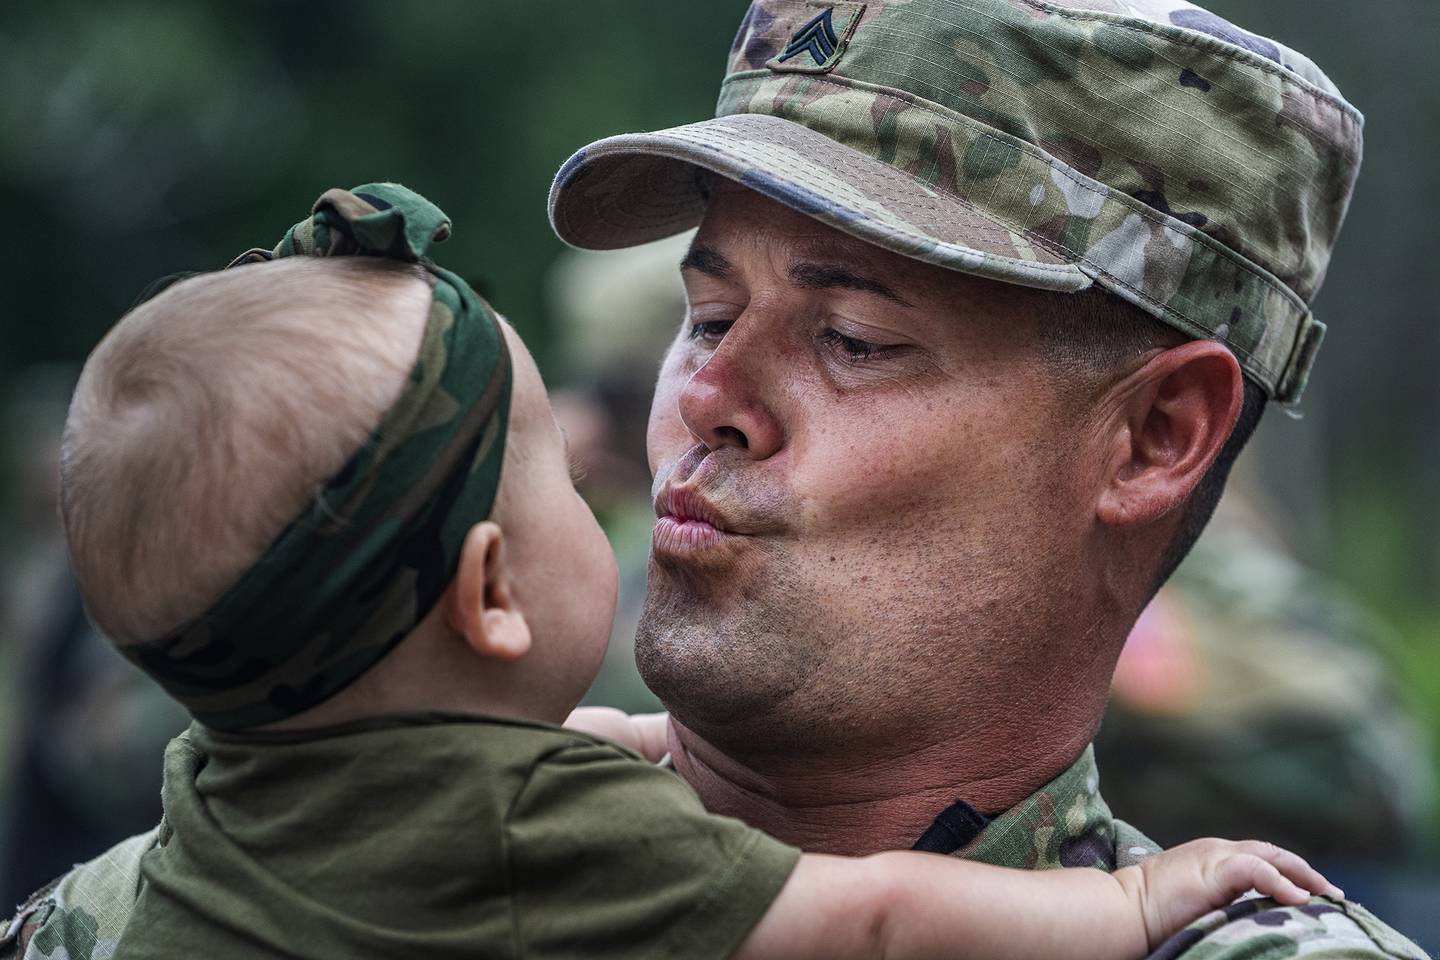 Sgt. Shawn Blakemore blows a kiss to his six-month old daughter Liv, Sunday, Aug. 9, 2020, as approximately 150 soldiers from the Stillwater-based 34th Military Police Company will deploy to Naval Station Guantanamo Bay in support of Joint Task Force Guantanamo to provide base security.